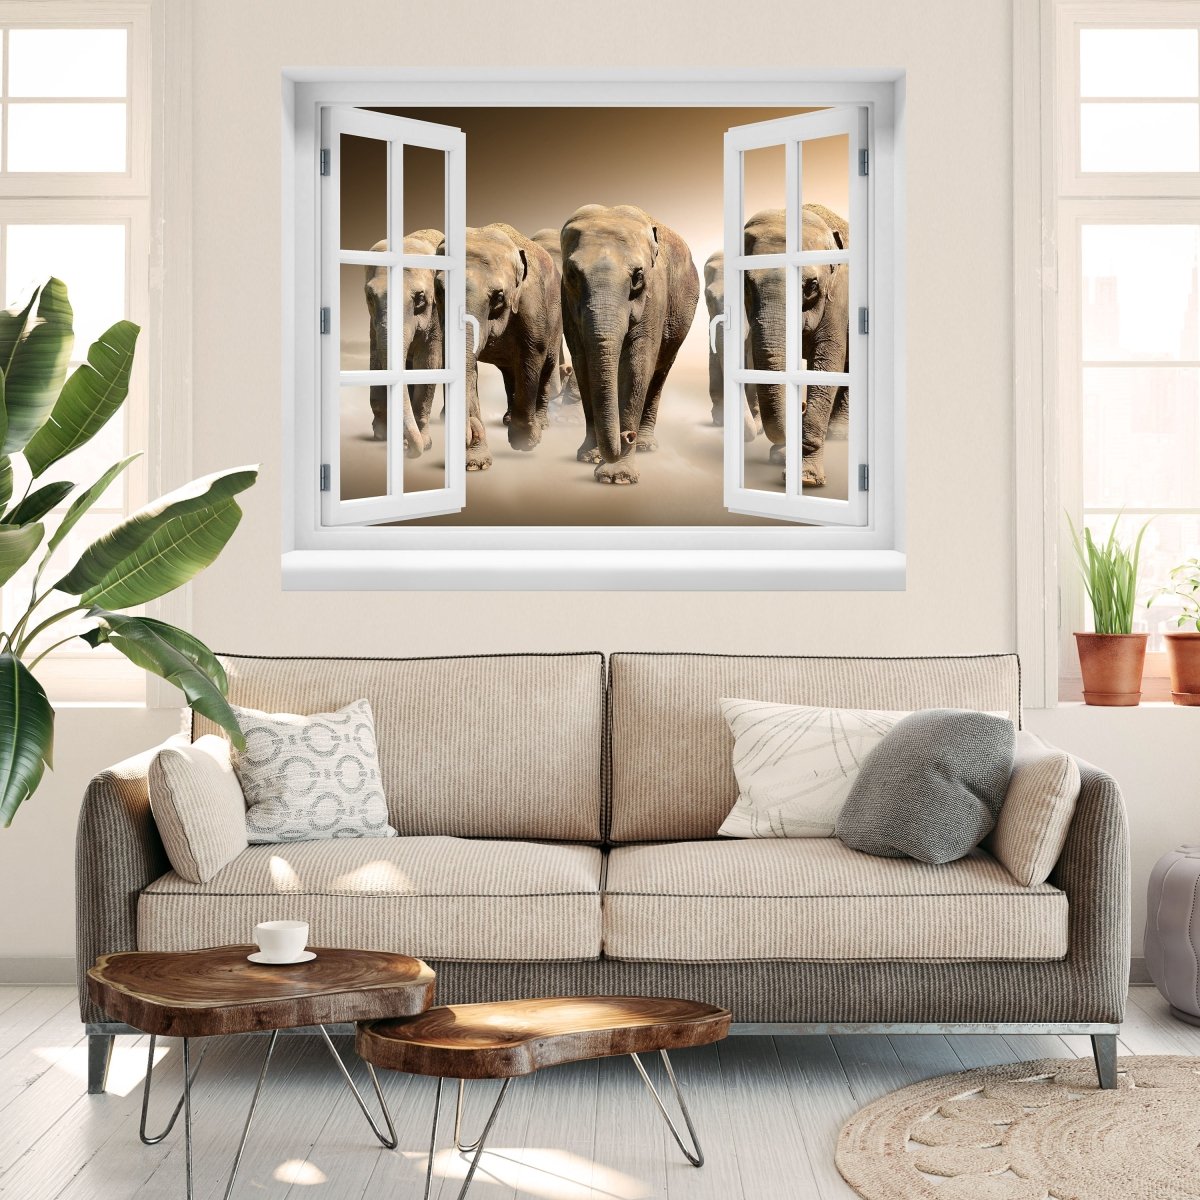 3D wall sticker African group of elephants - Wall Decal M0245